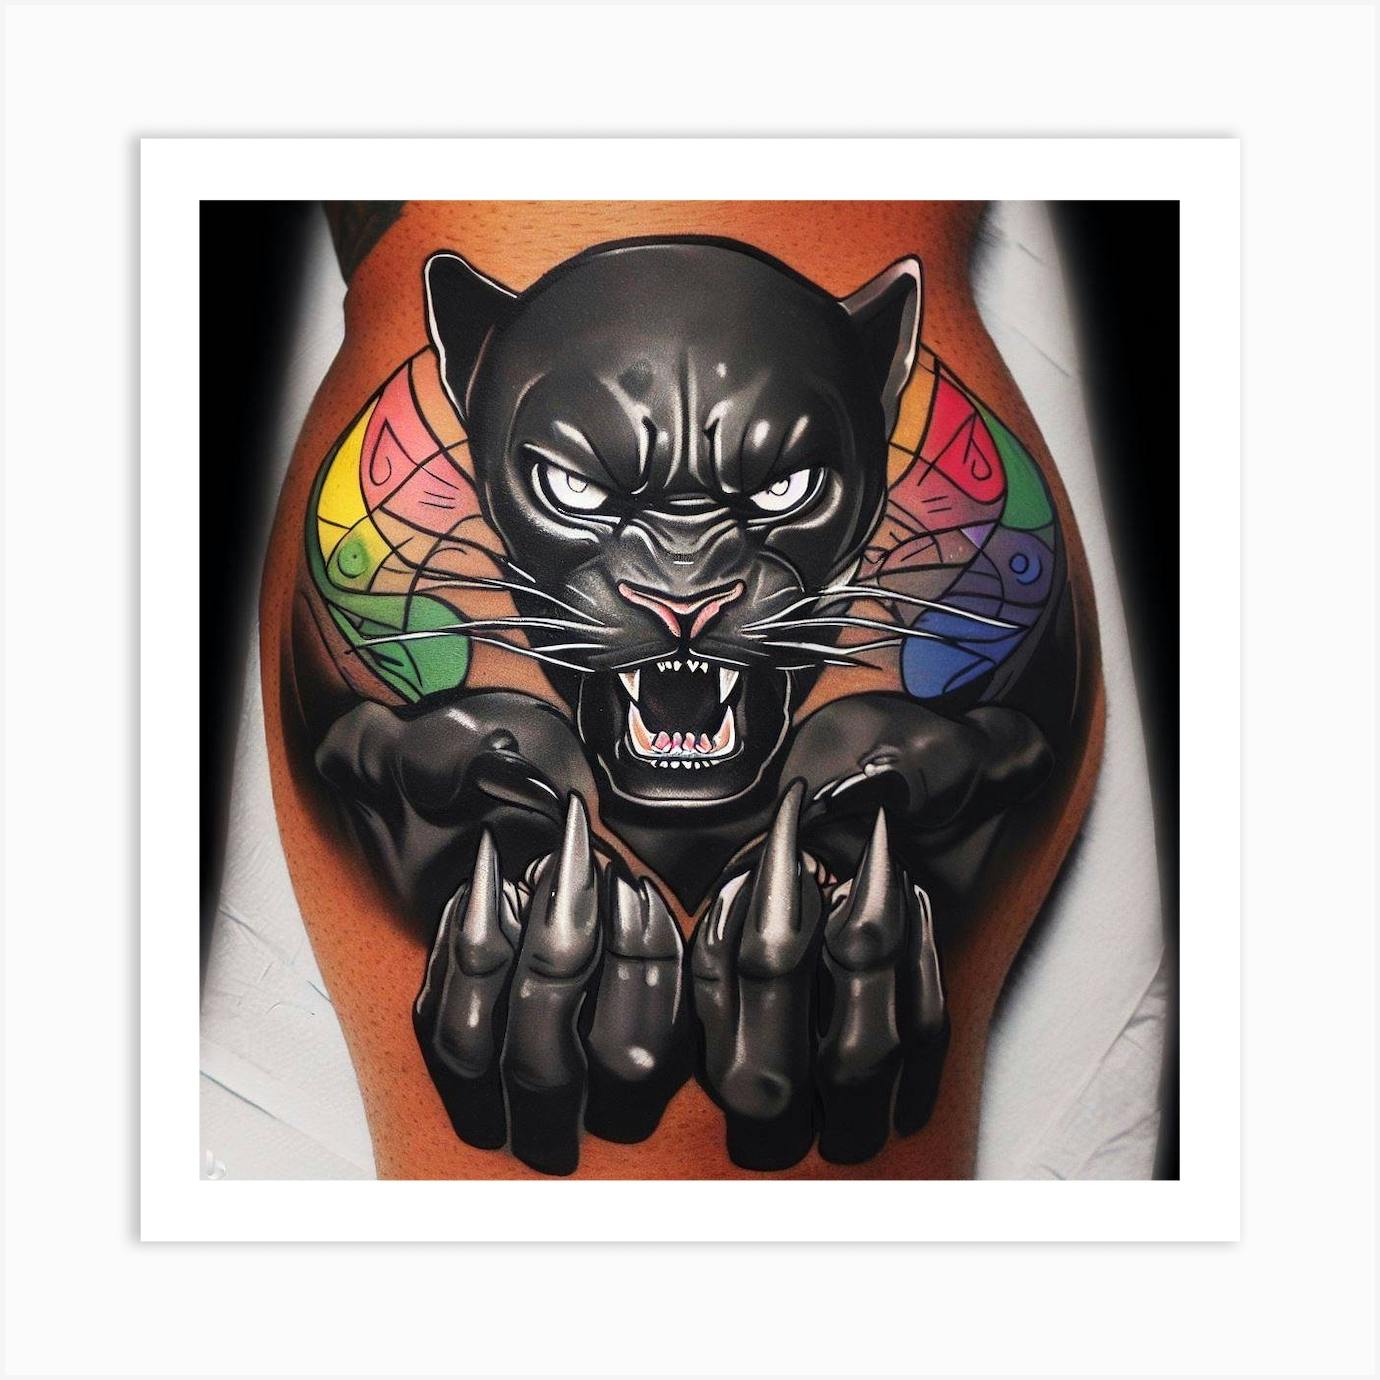 Tattoo uploaded by blackline tattoo • #blackpanther #panther #cat #wildcat  #exotic #animal #predator #realistic #realisticcolour #realism #chest  #teeth #eyes #wild • Tattoodo